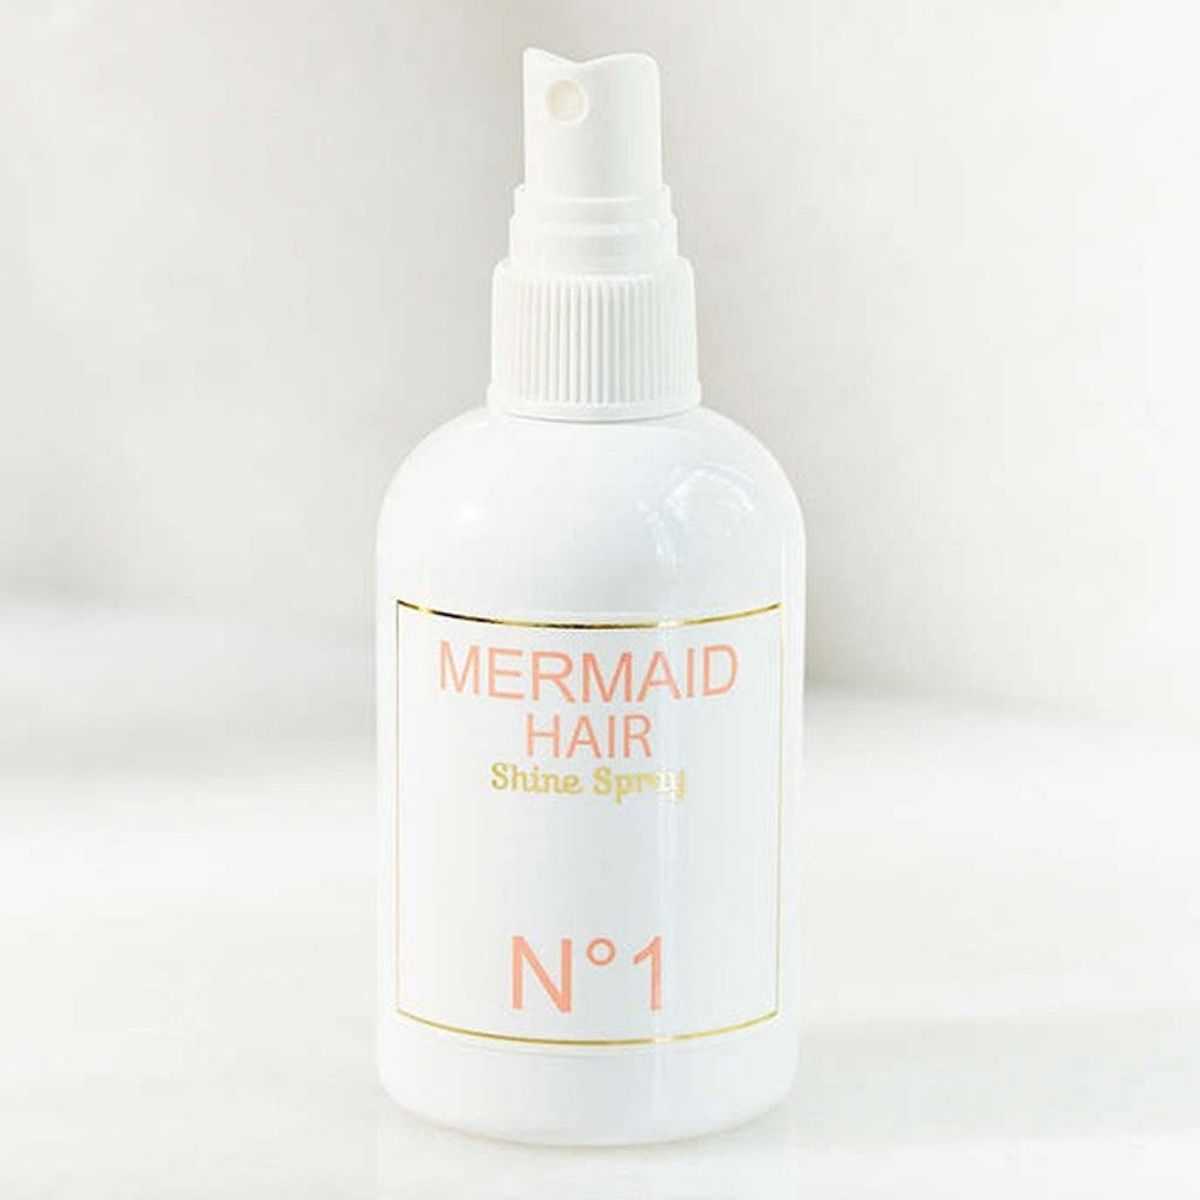 11 Products That Give Your Hair Major Shine